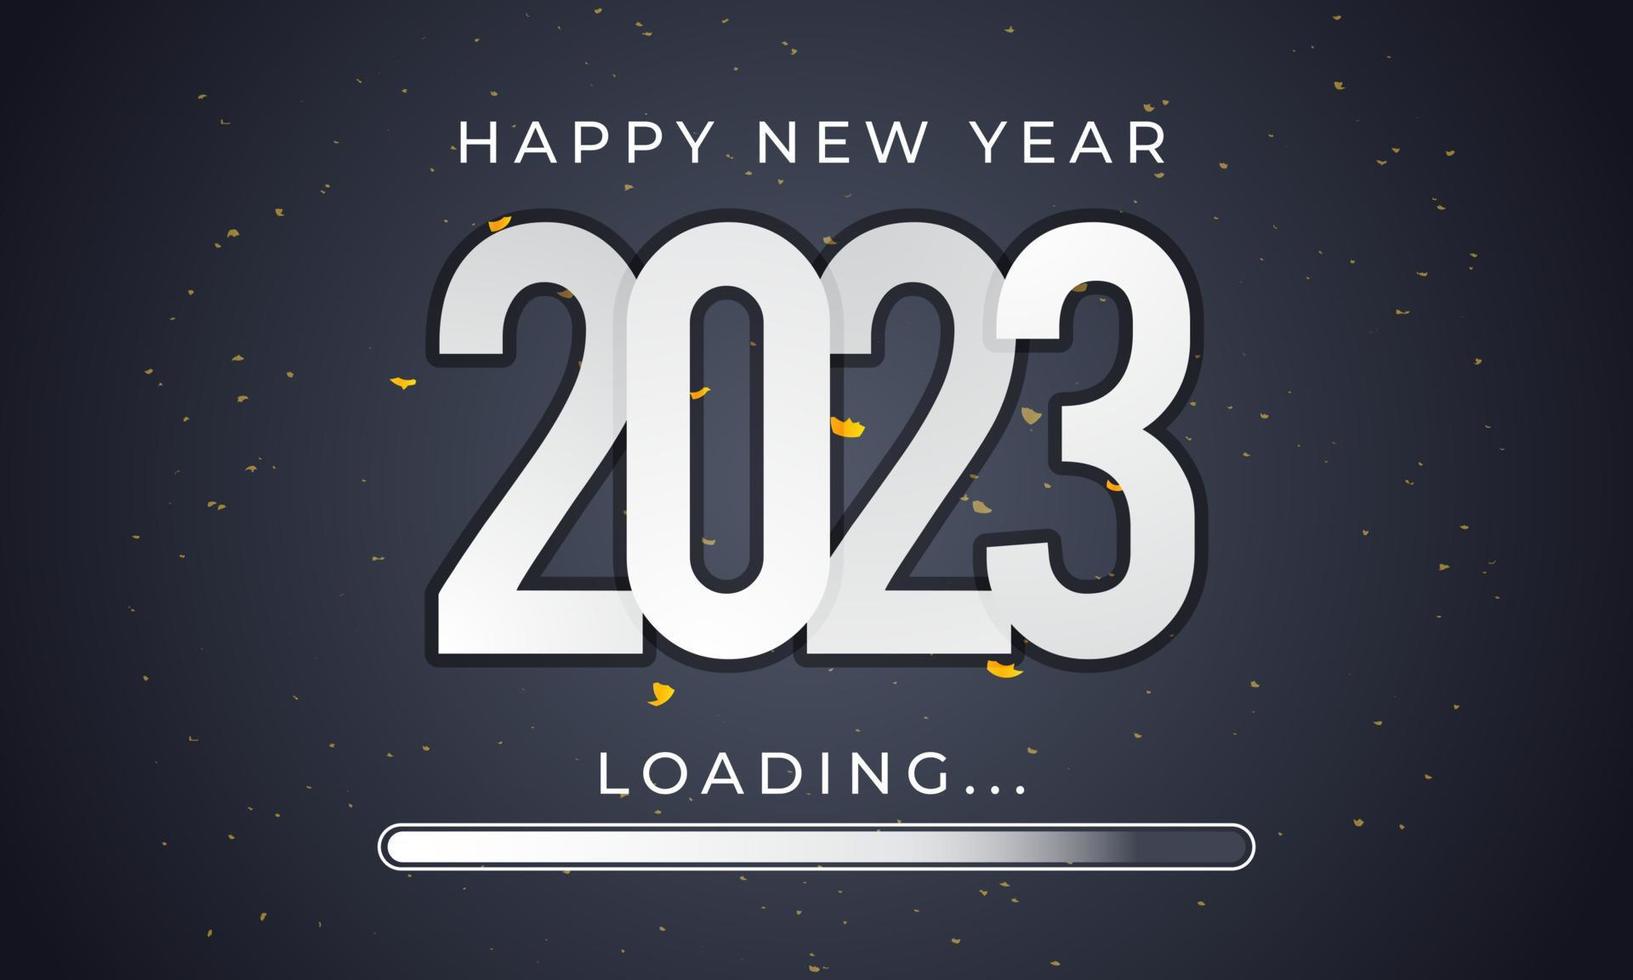 Loading New Year 2023 banner illustration on isolated background vector